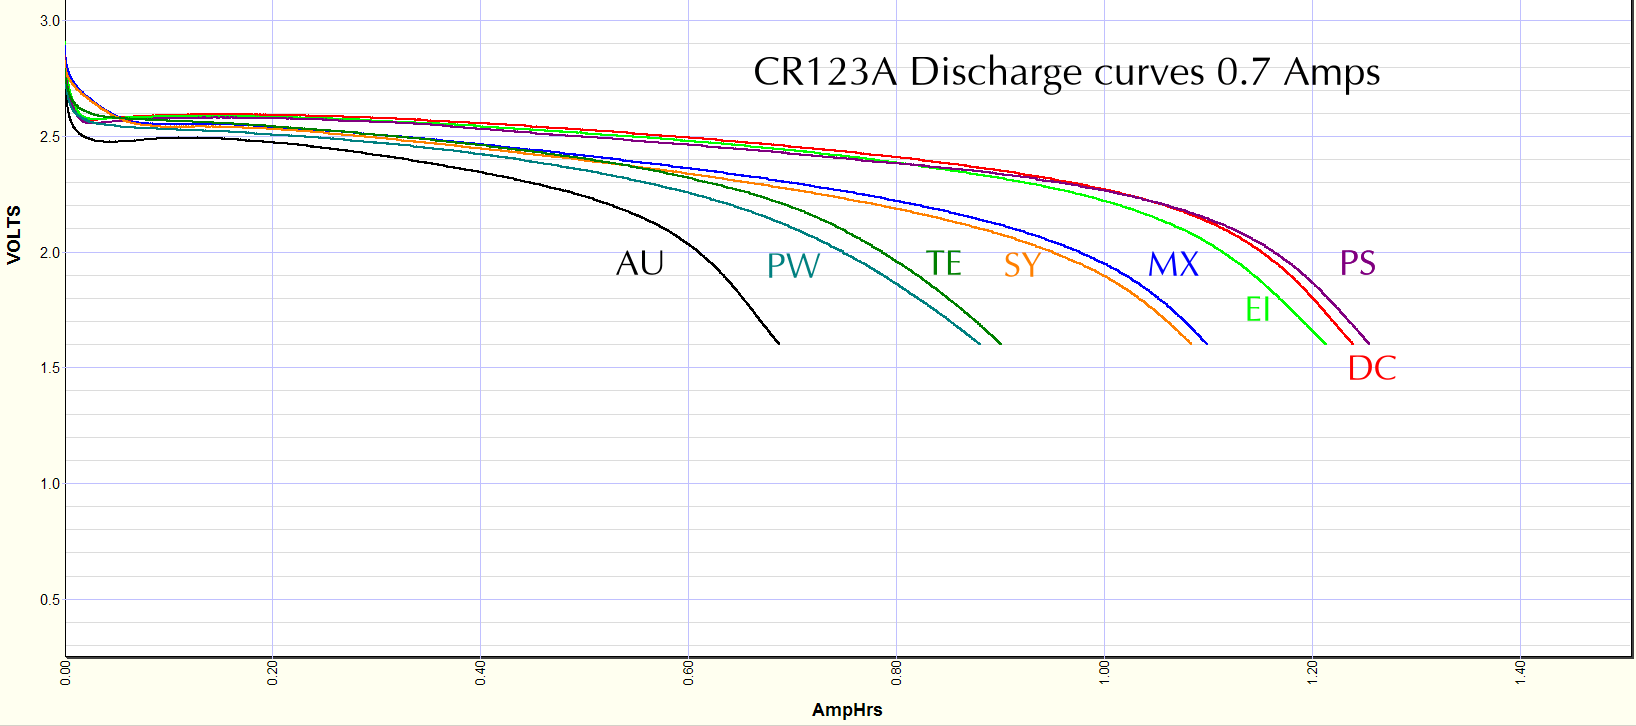 CR123A cells discharged at 700 mA